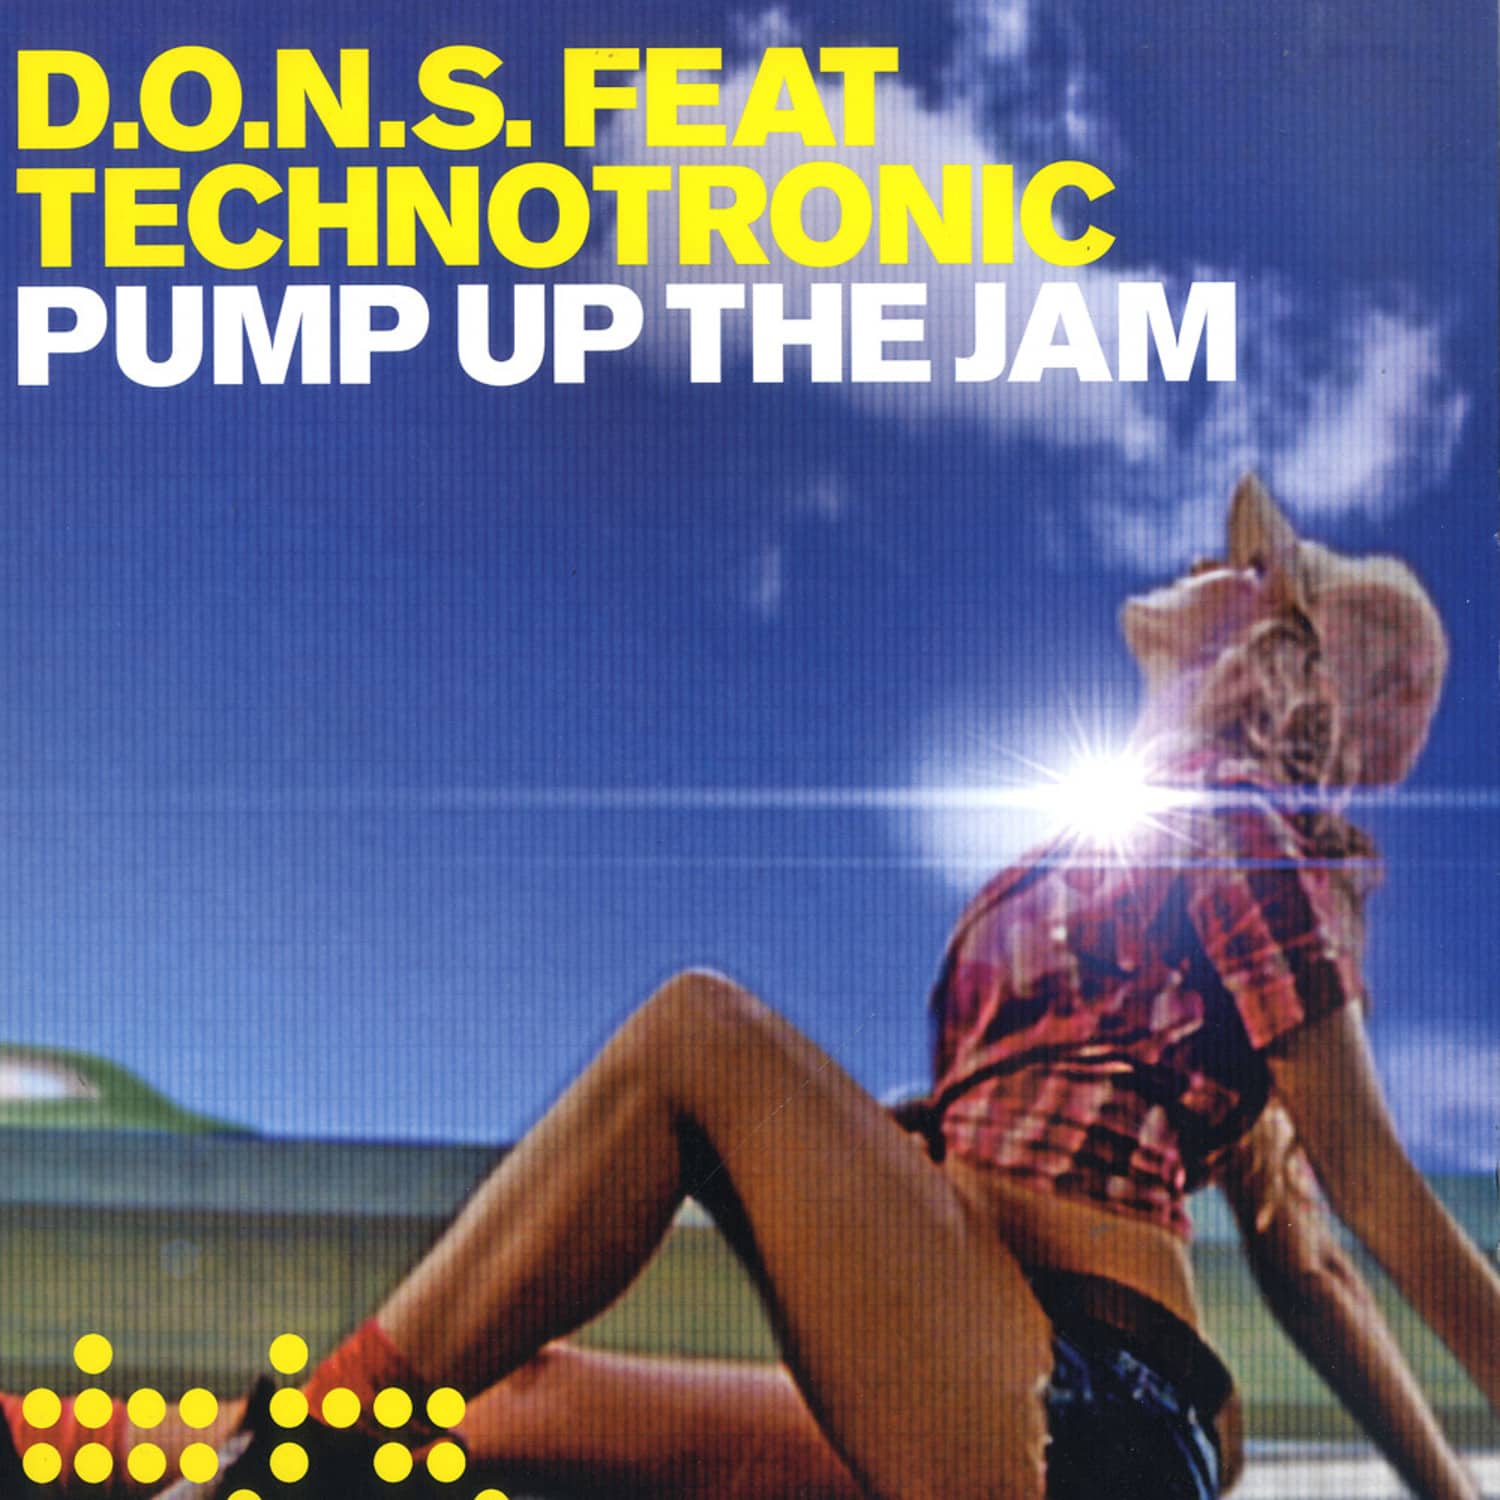 Dons feat Technotronic - PUMP UP THE JAM